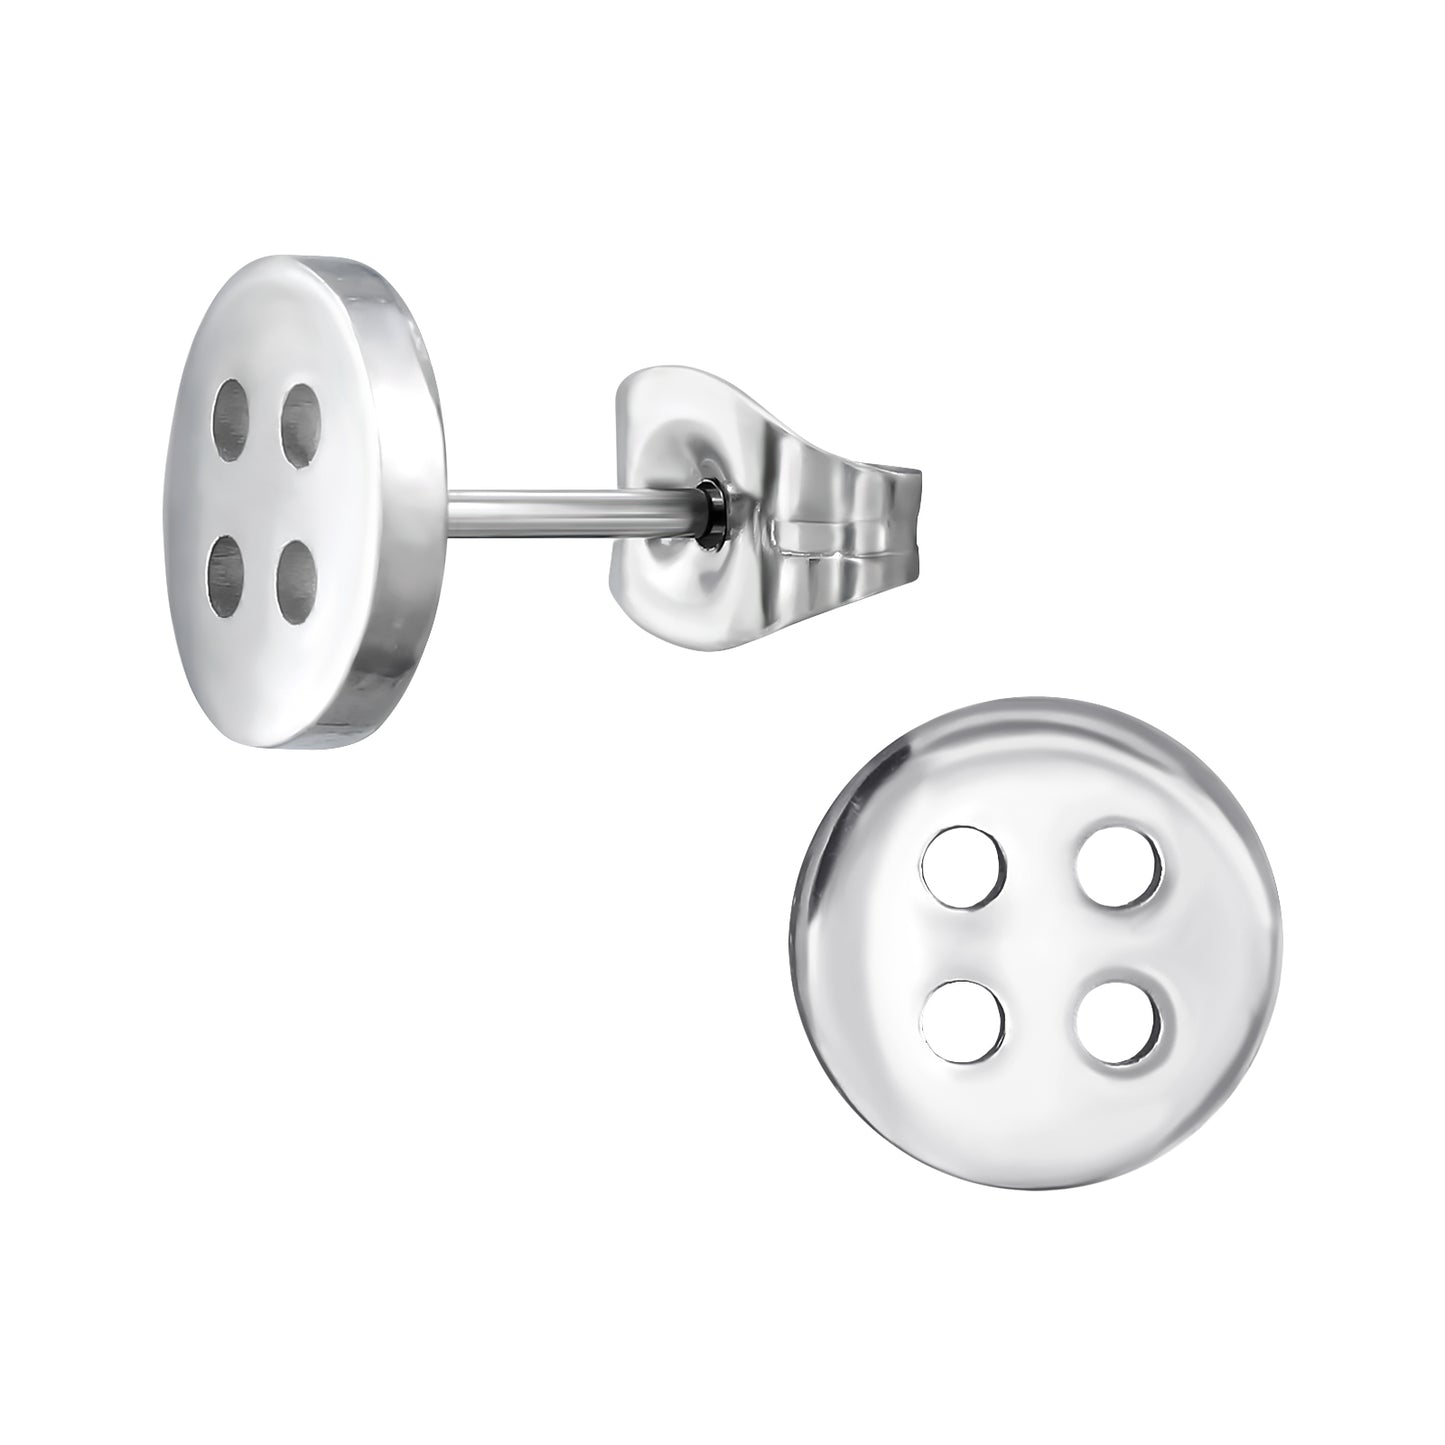 Button Stud Earrings - Pair - Stainless Steel